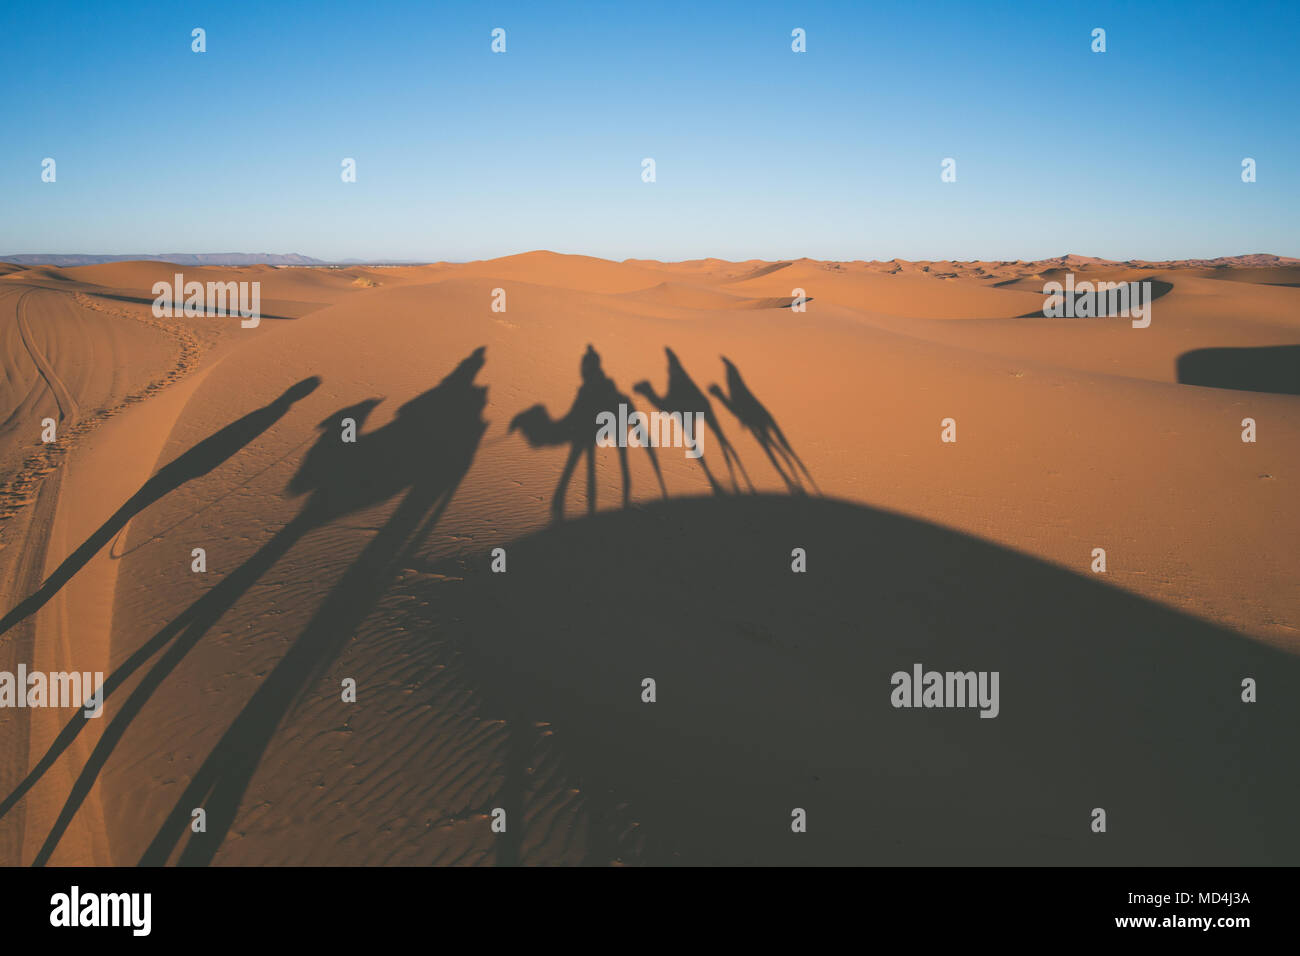 Vintage looking image of tourists riding camels Sahara desert with camel shadows on a sand Stock Photo